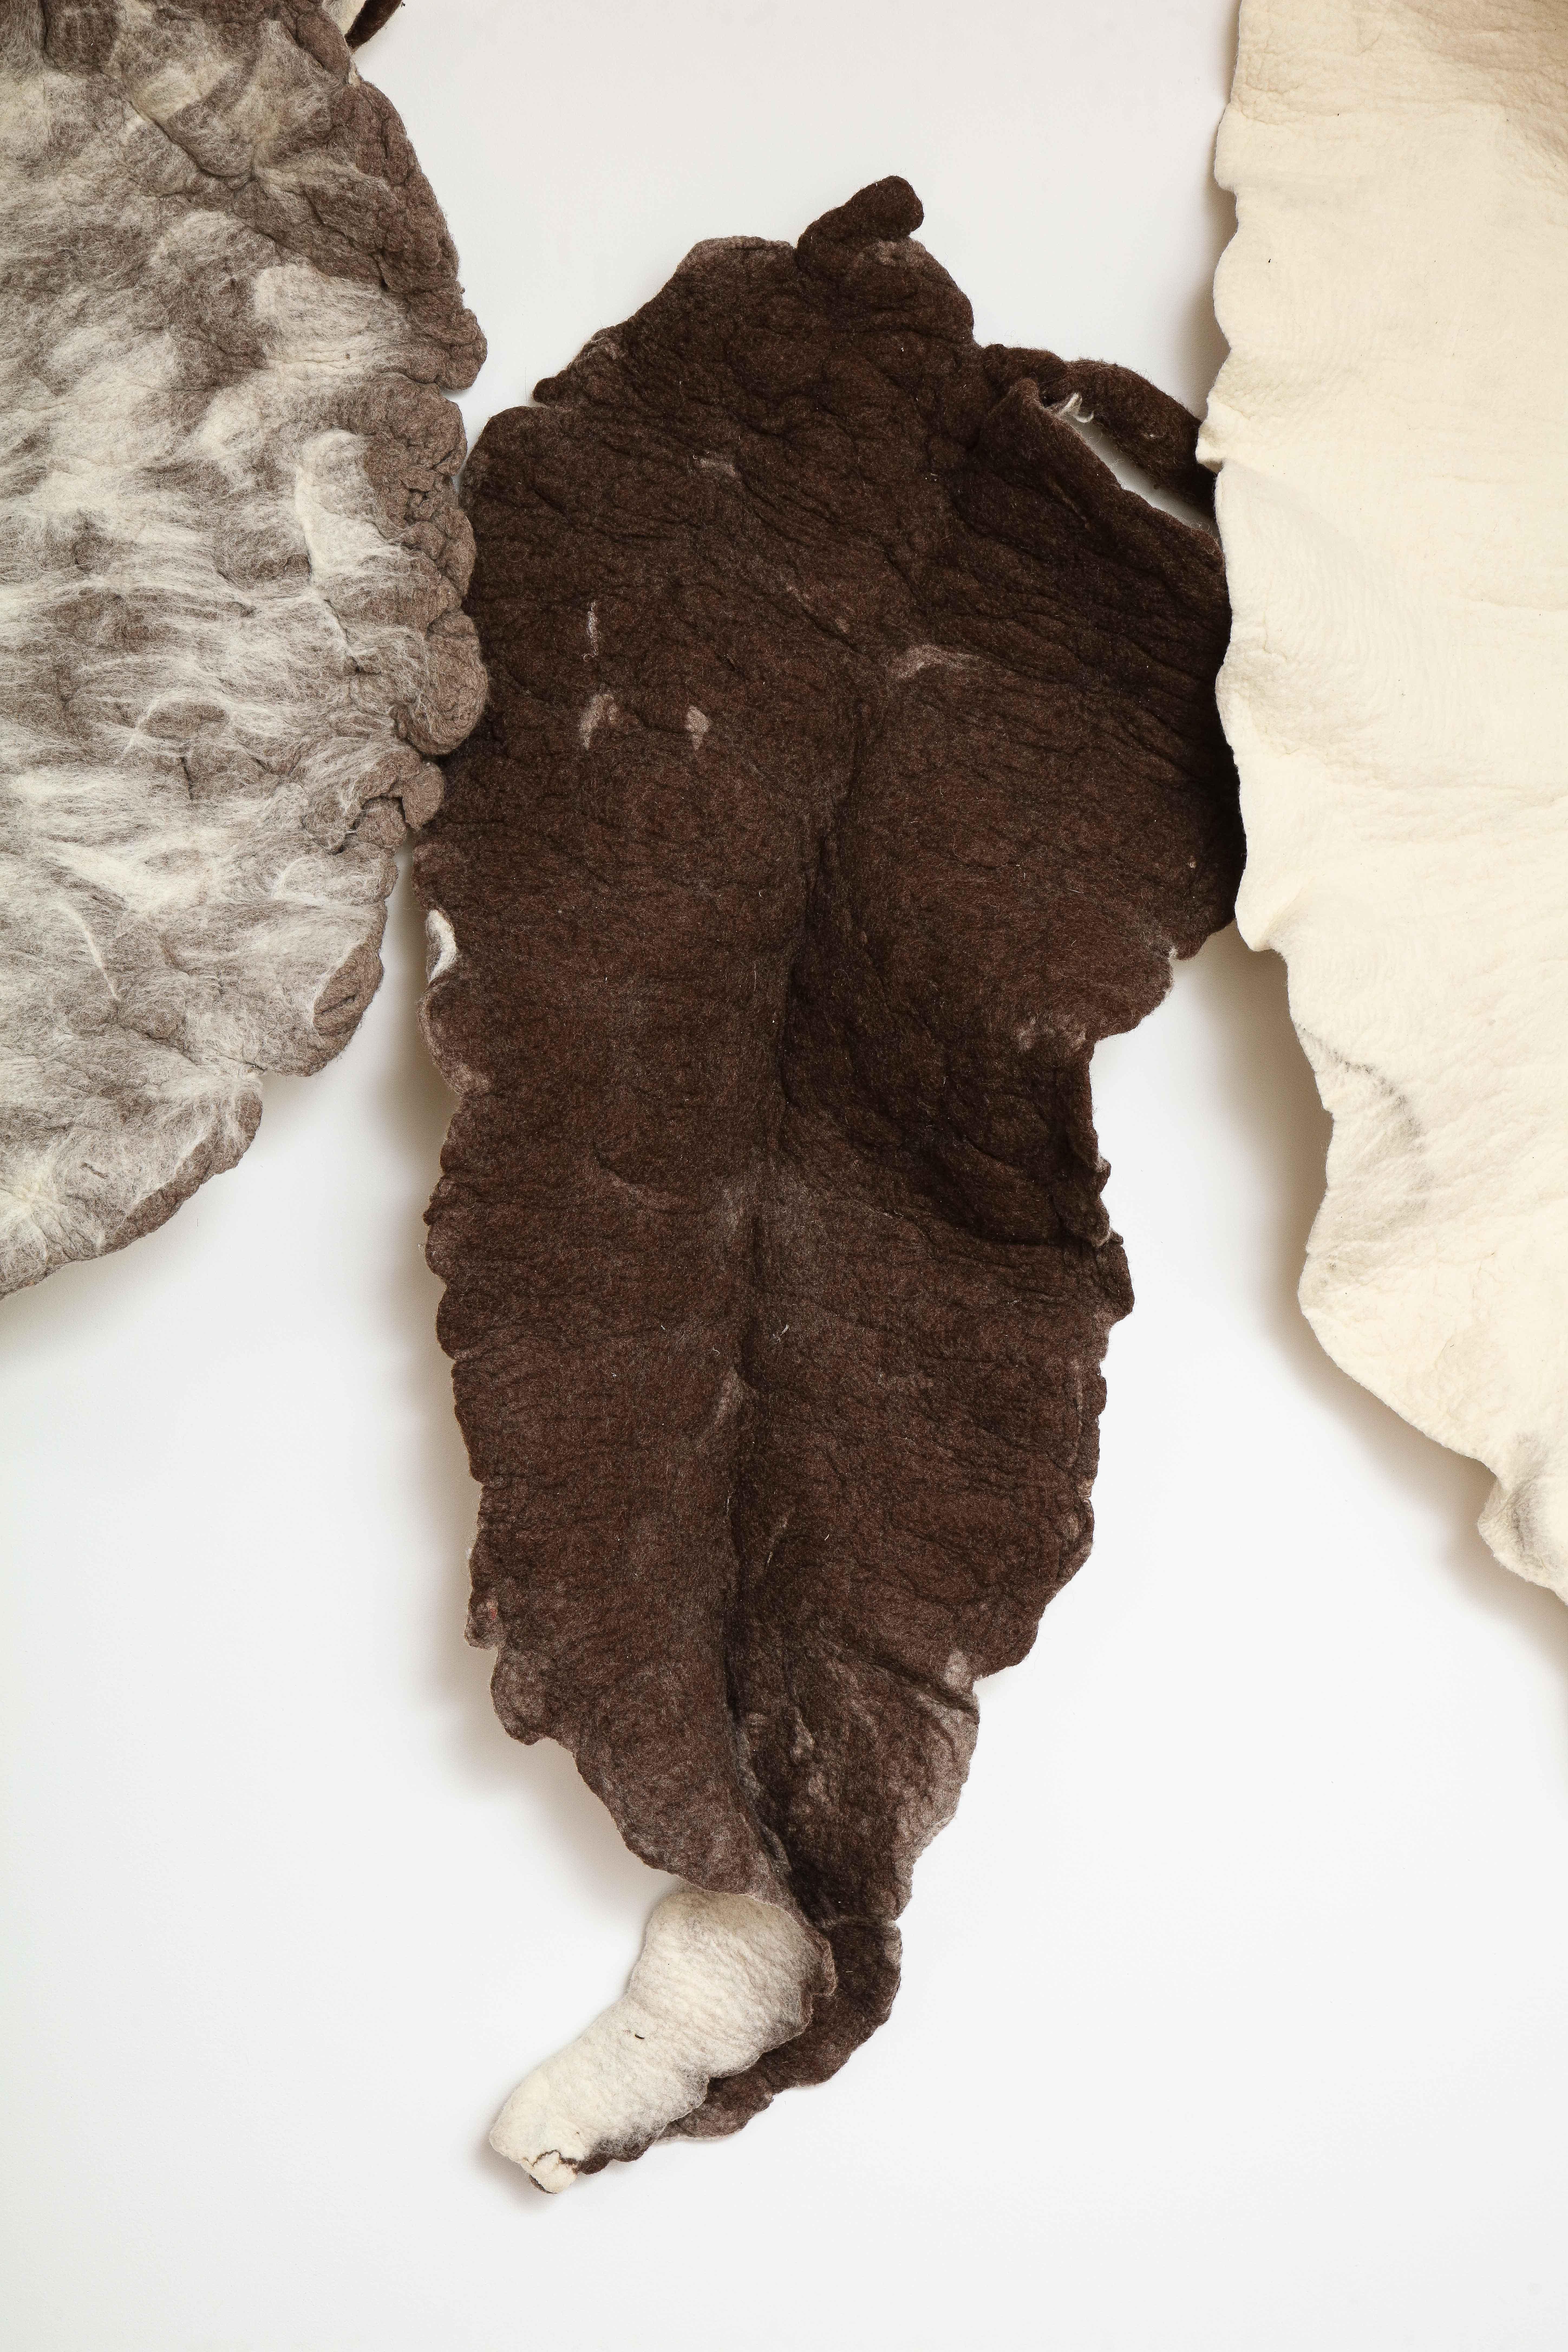 Giant Leaf, Naturally Dyed Felted Wool Sculpture by Inês Schertel, Brazil

Ines Schertel's primary material is sheep's wool. As a practitioner of Slow Design, the artist takes a holistic approach to textile design, personally overseeing the whole